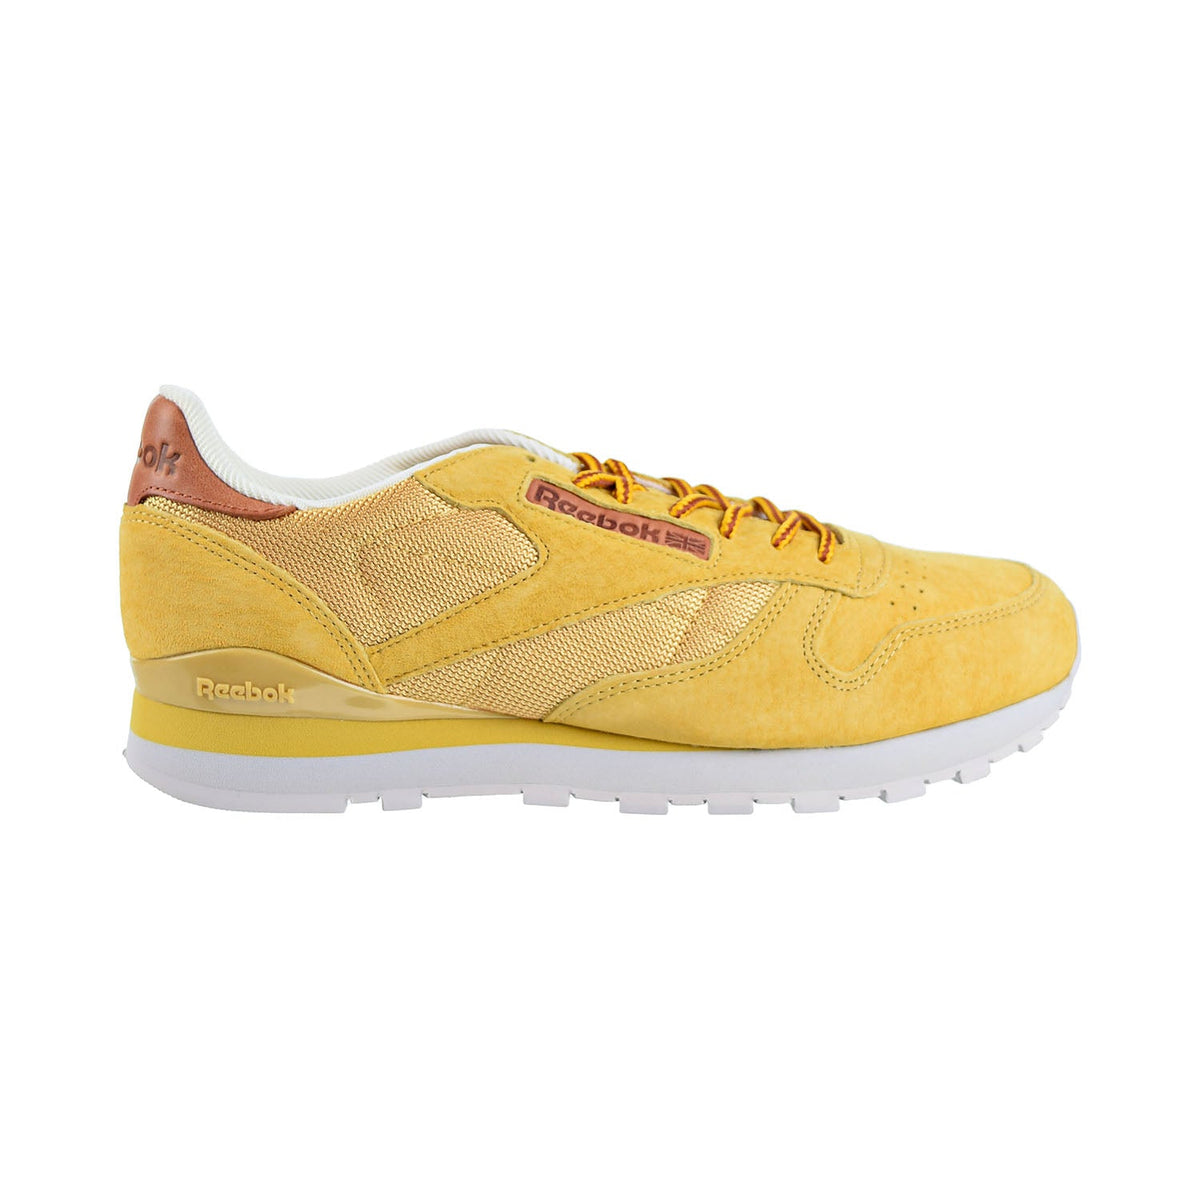 Reebok Leather OL Shoes Golden Wheat/Steel/Gold – NY